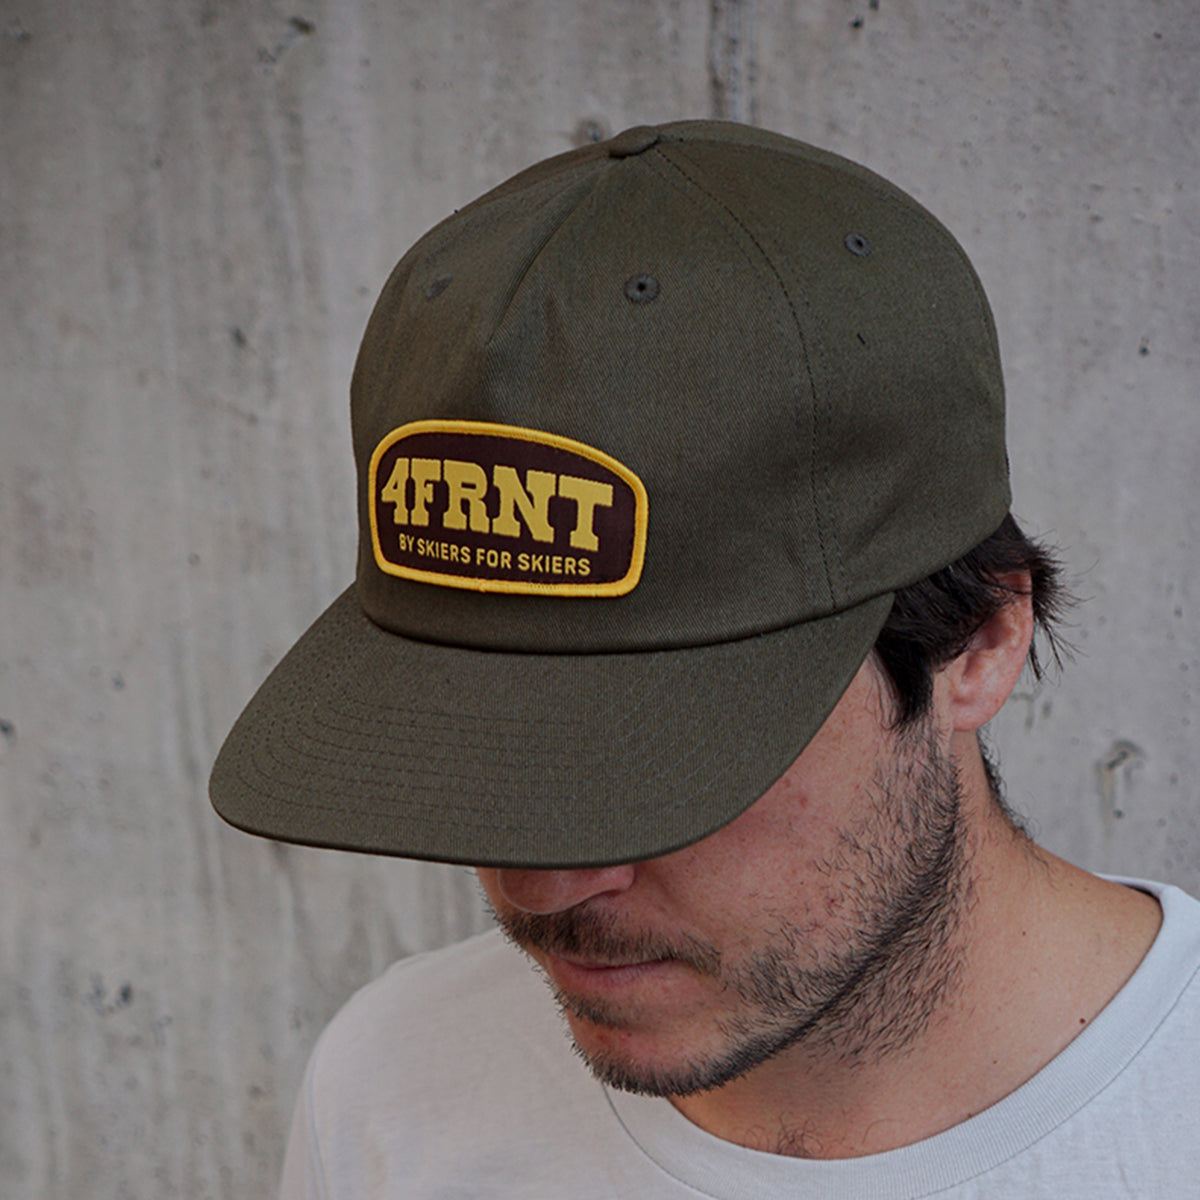 dark green hat with rodeo 4frnt logo on a man with dark hair and short beard in a white shirt